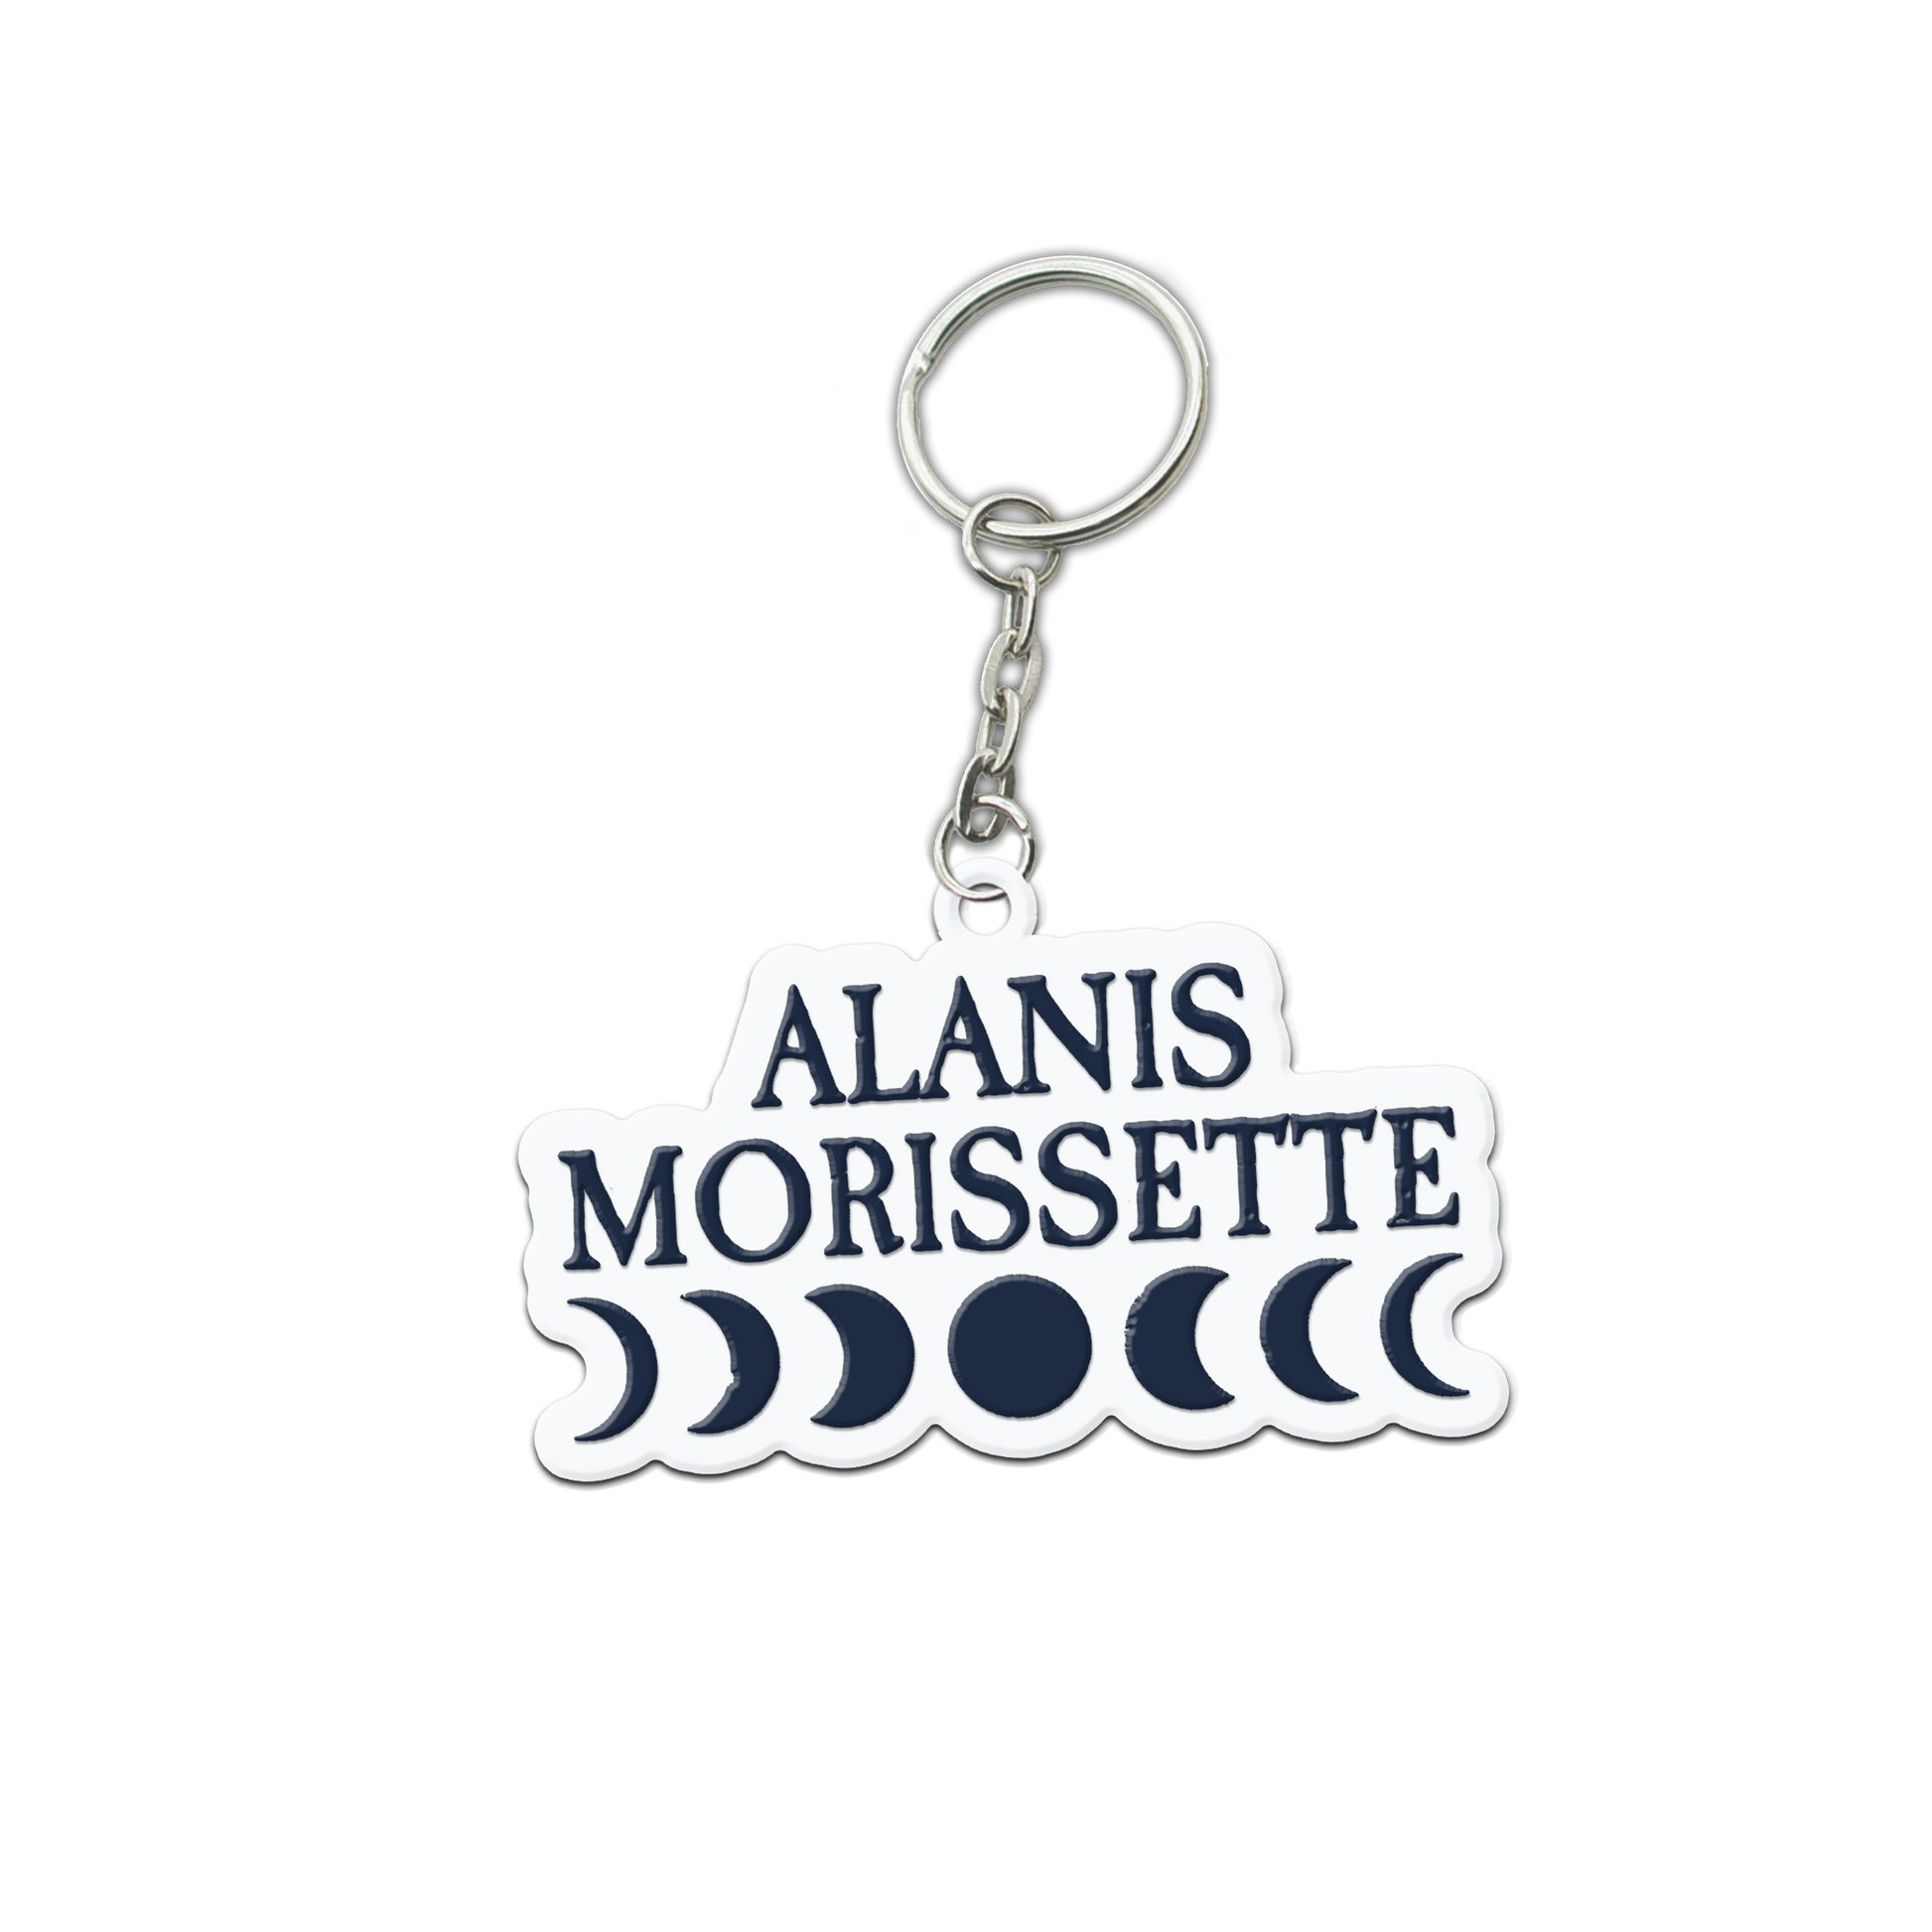 Keychain featuring Alanis Morissette’s name and moon phase symbols.